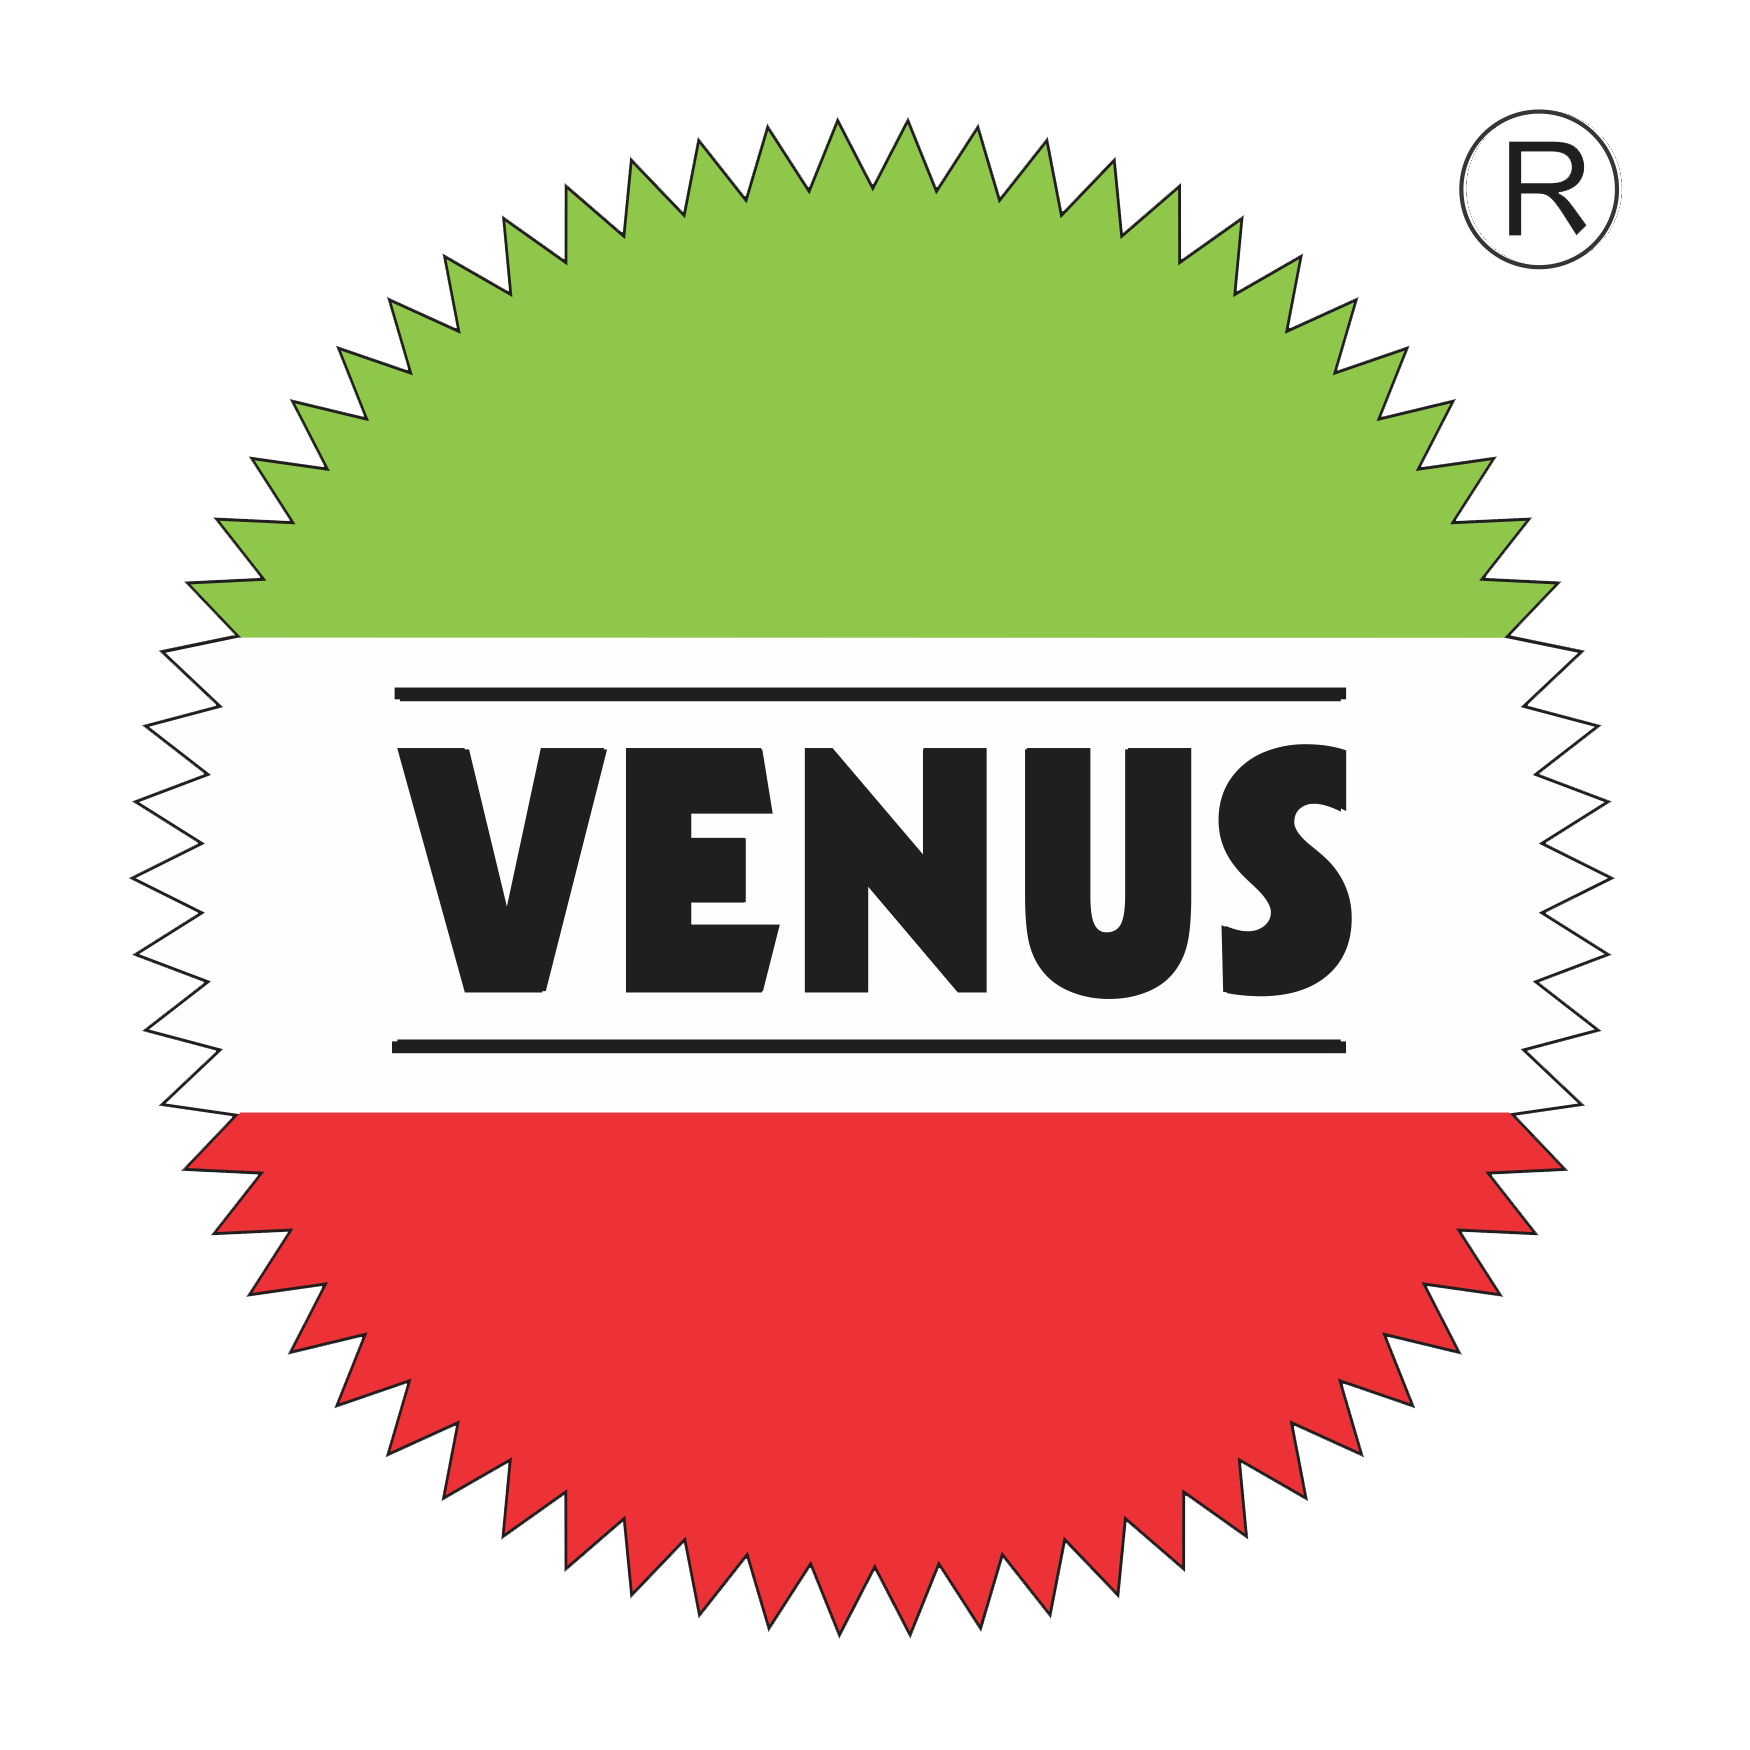 Venus Logo Isolated On White Background For Your Web, Mobile And App Design  Royalty Free SVG, Cliparts, Vectors, and Stock Illustration. Image 98899638.